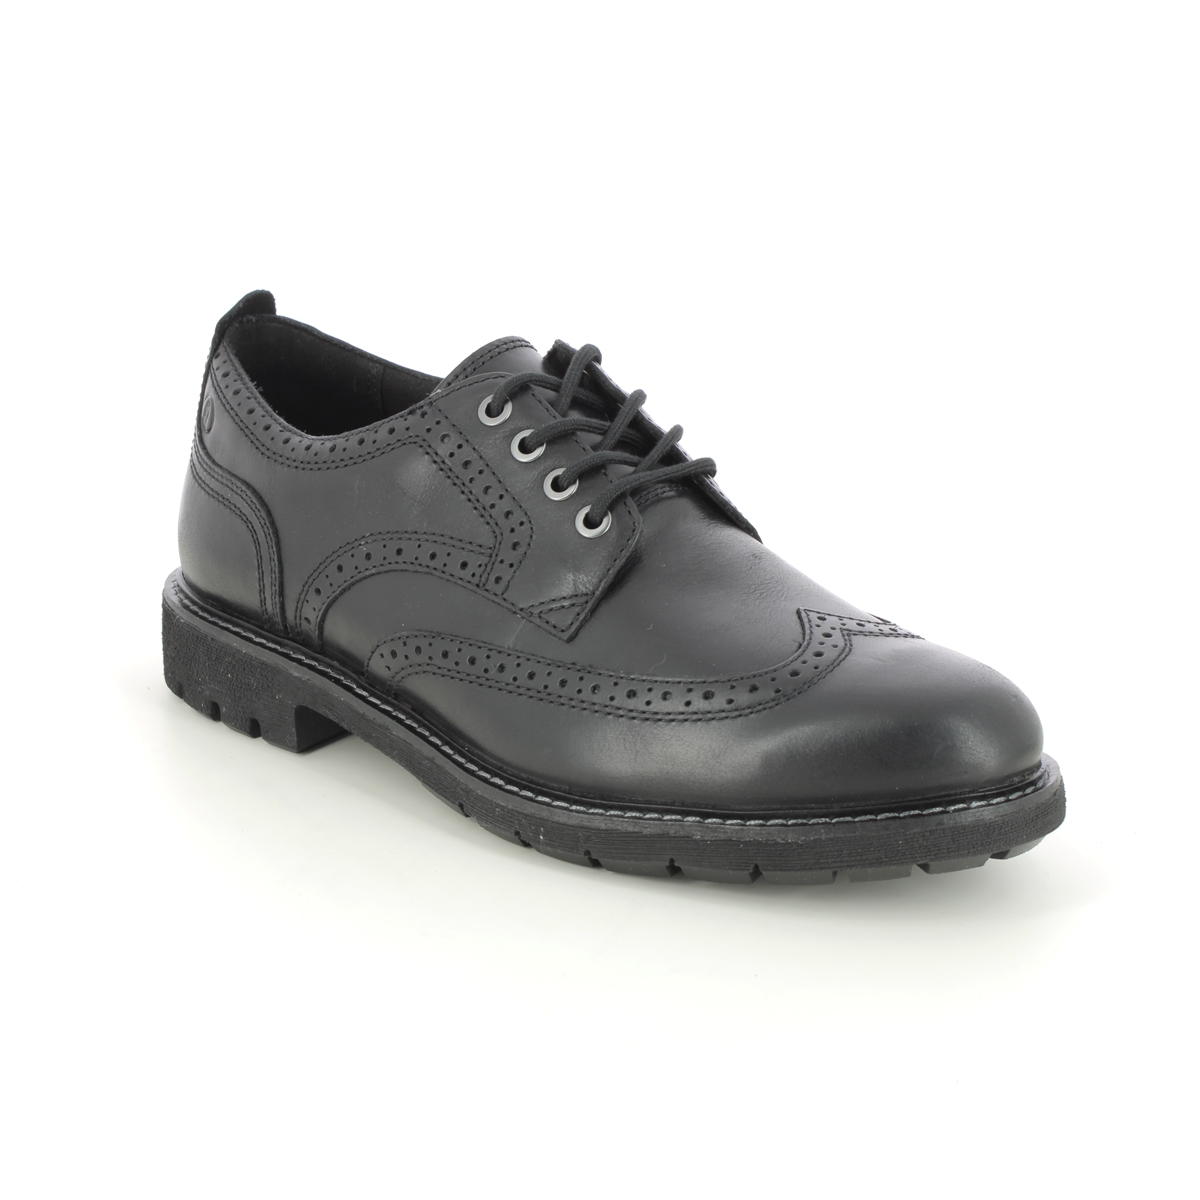 Clarks Batcombe Far Wing Black Leather Mens Brogues 734387G In Size 8 In Plain Black Leather G Width Fitting